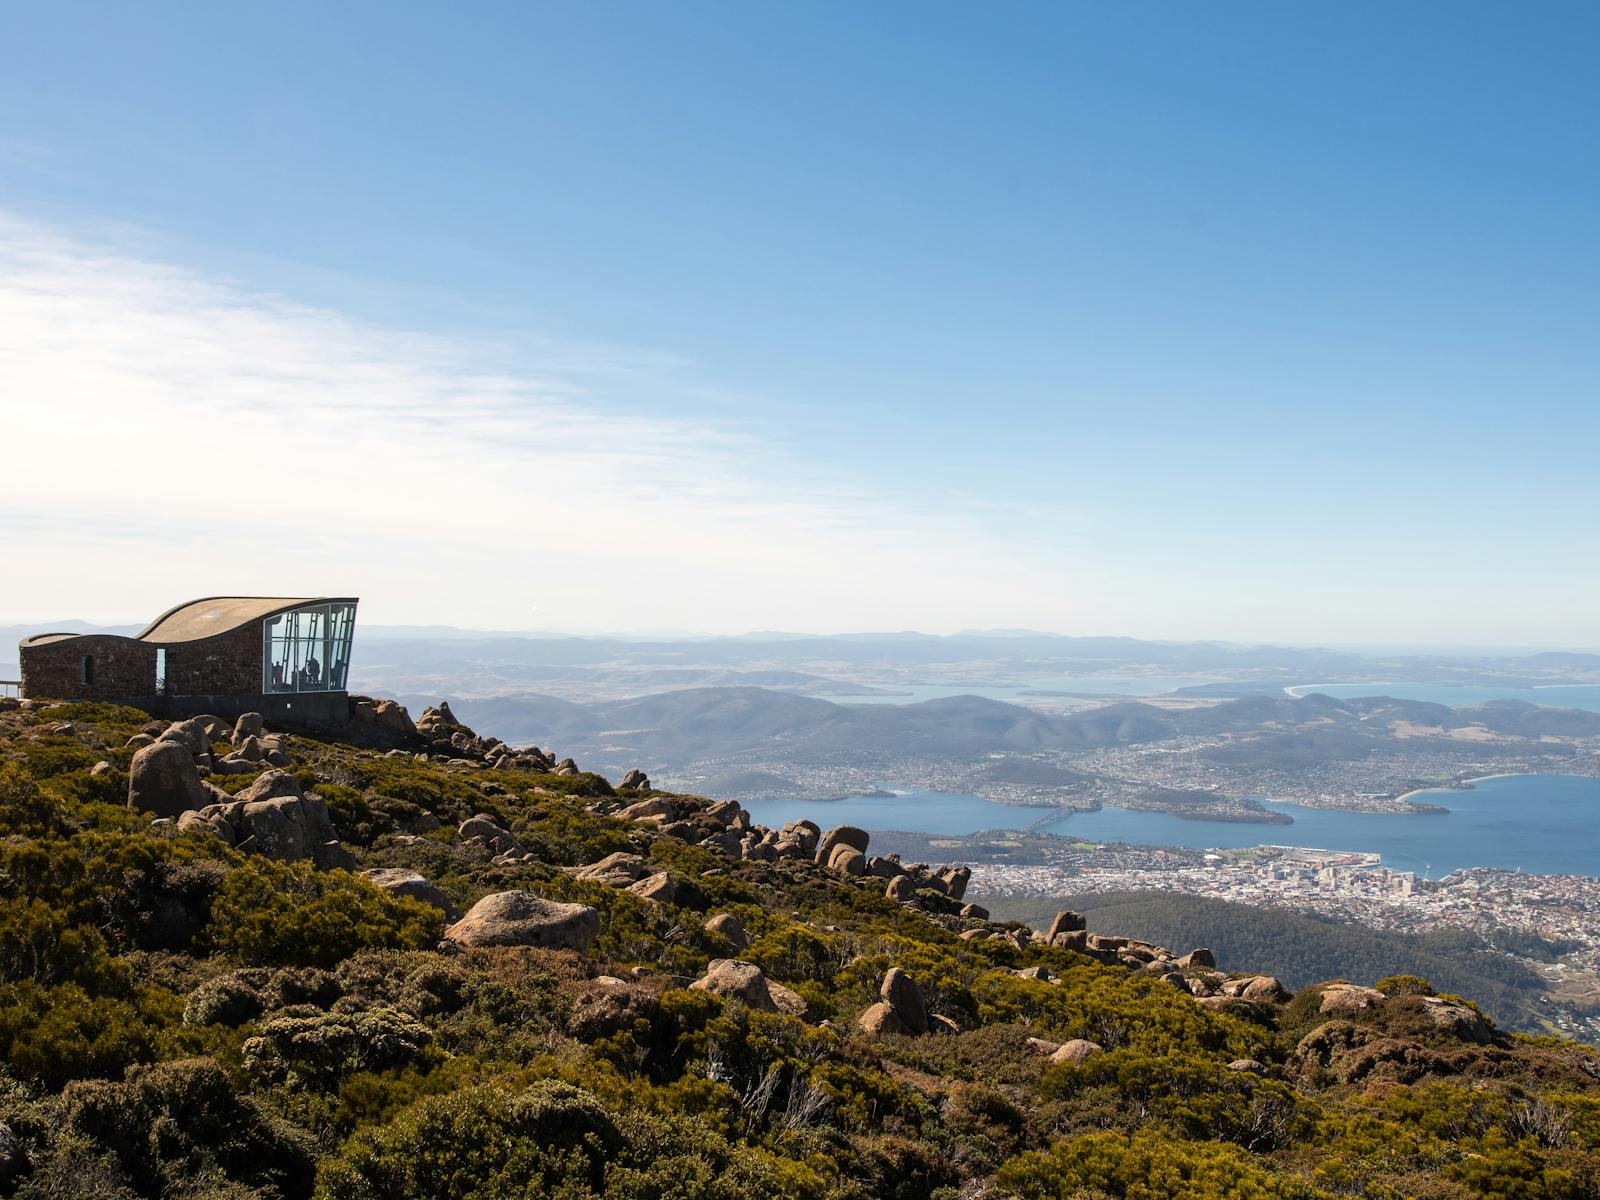 Observation shelter lookout at the summit of kunanyi / Mount Wellington in Wellington Park